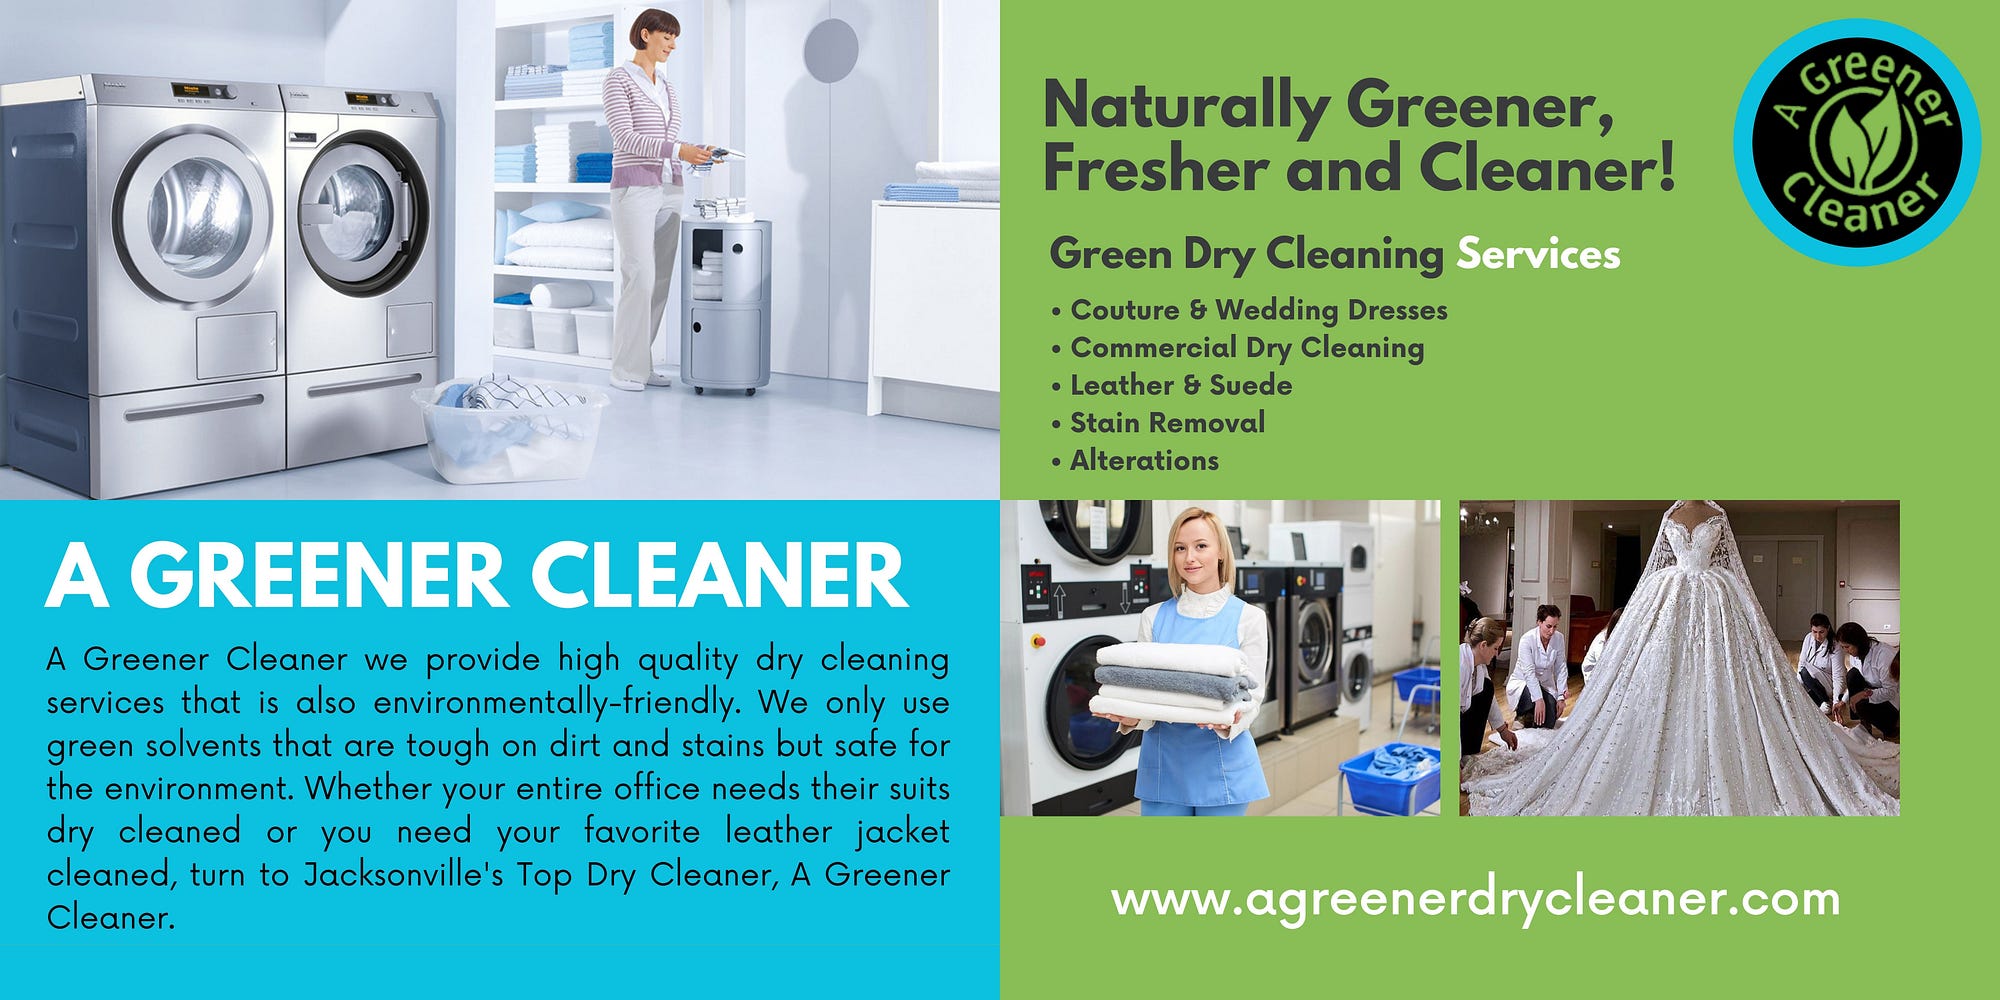 Green Dry Cleaners and Alterations St. John's County — A Greener Cleaner -  Agreenerdrycleaner - Medium